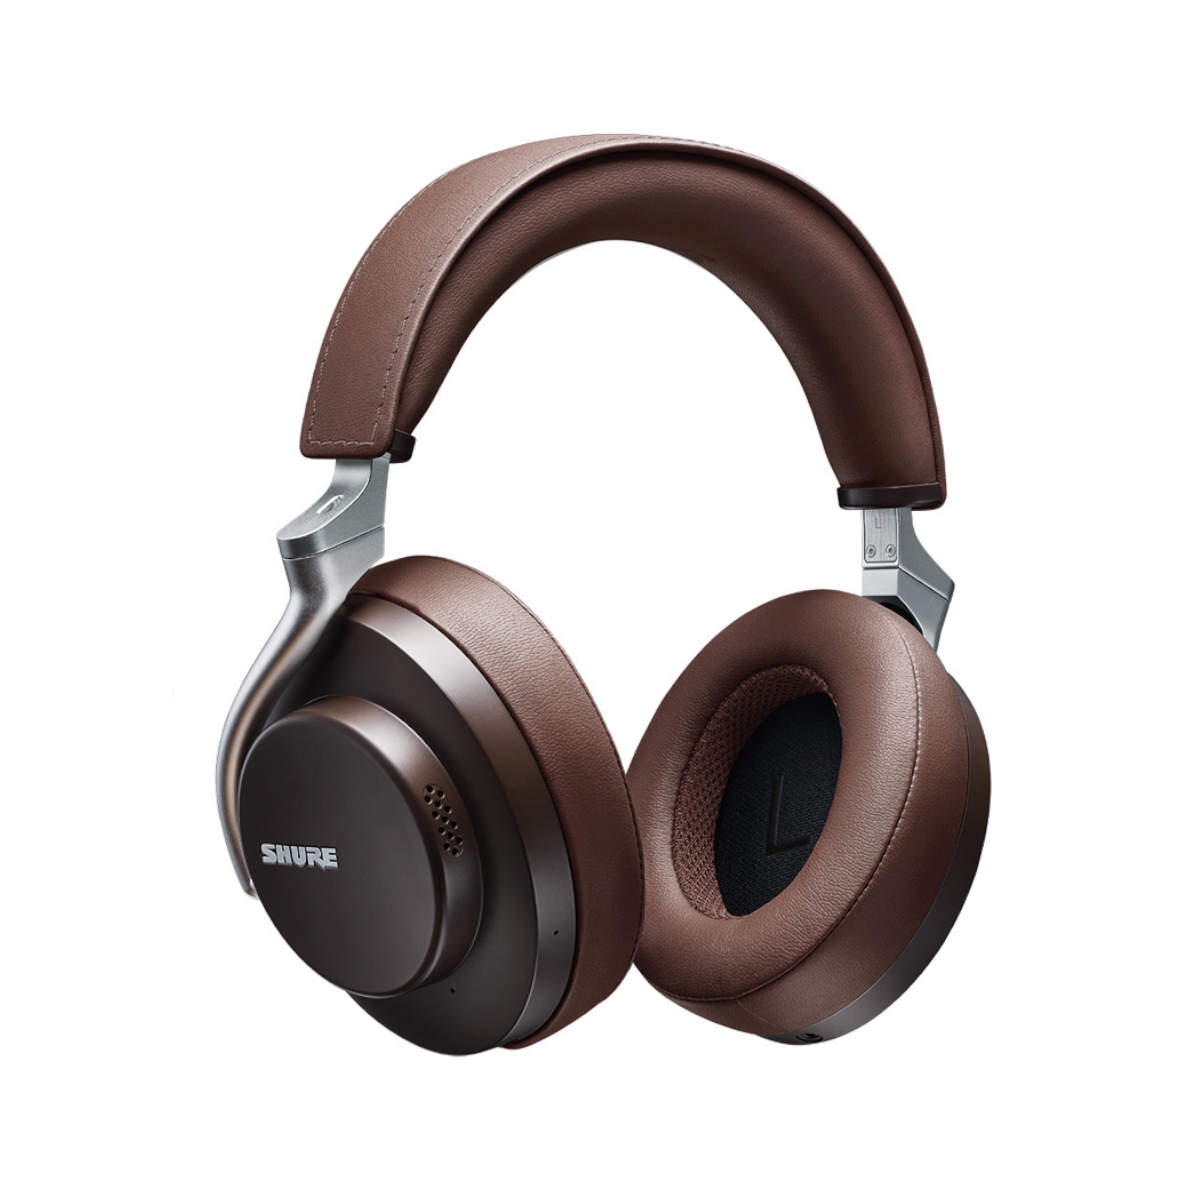 Shure AONIC 50 Wireless Noise Cancelling Headphones (Brown)